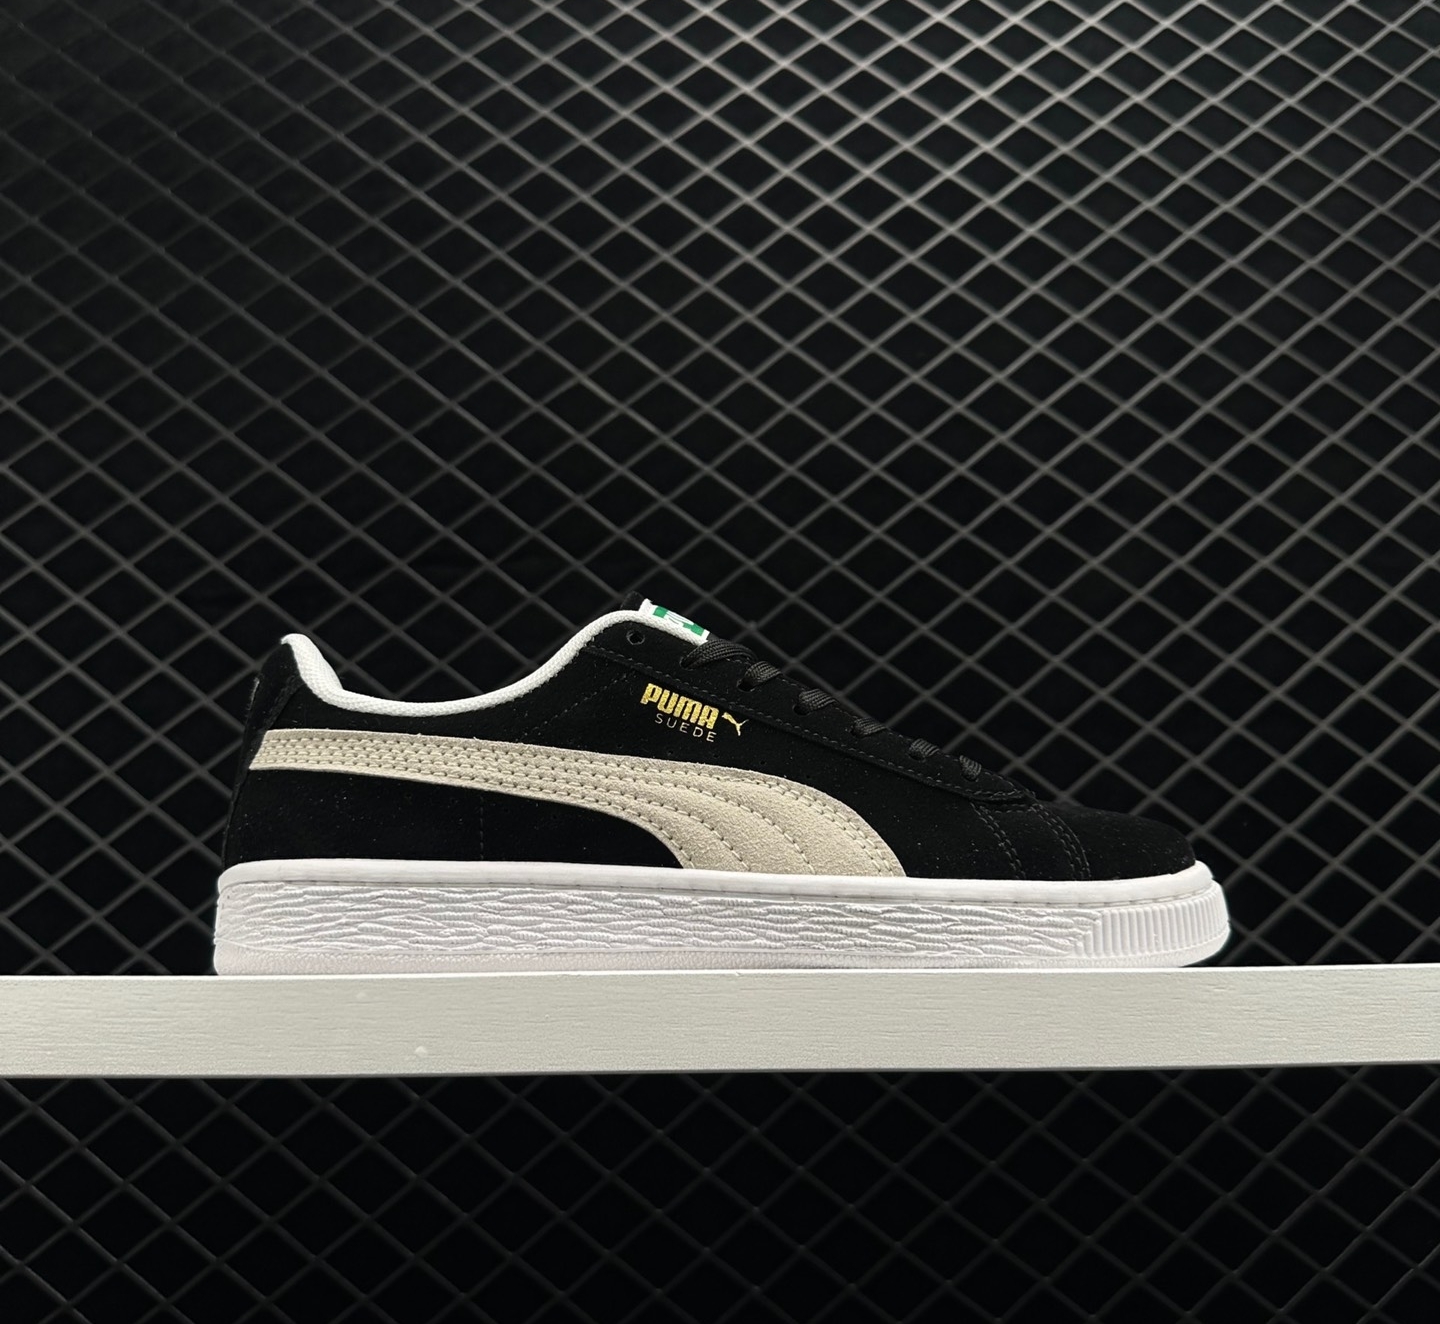 PUMA Suede Classic 21 'Black Khaki White' 374915 01 - Stylish and Versatile Sneakers for All Occasions!